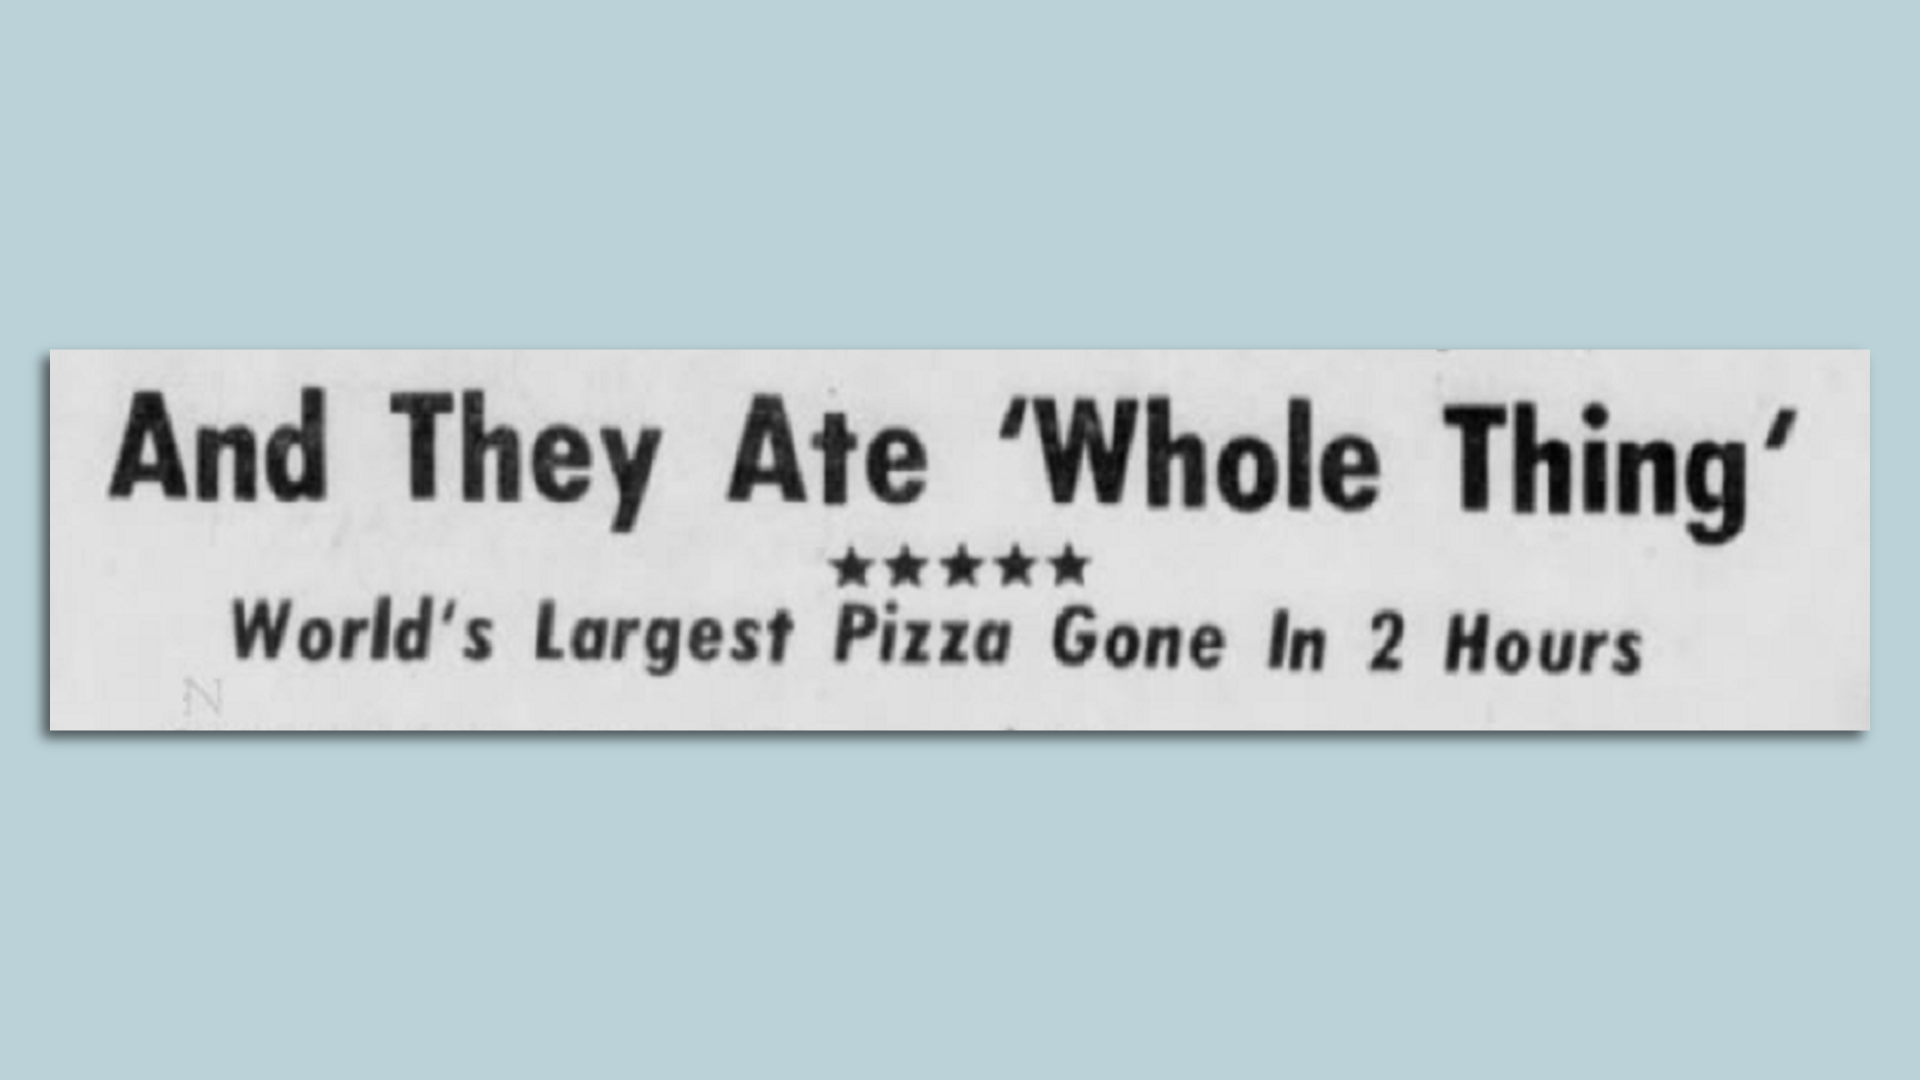 A news headline from 1974 about the world's largest pizza. 